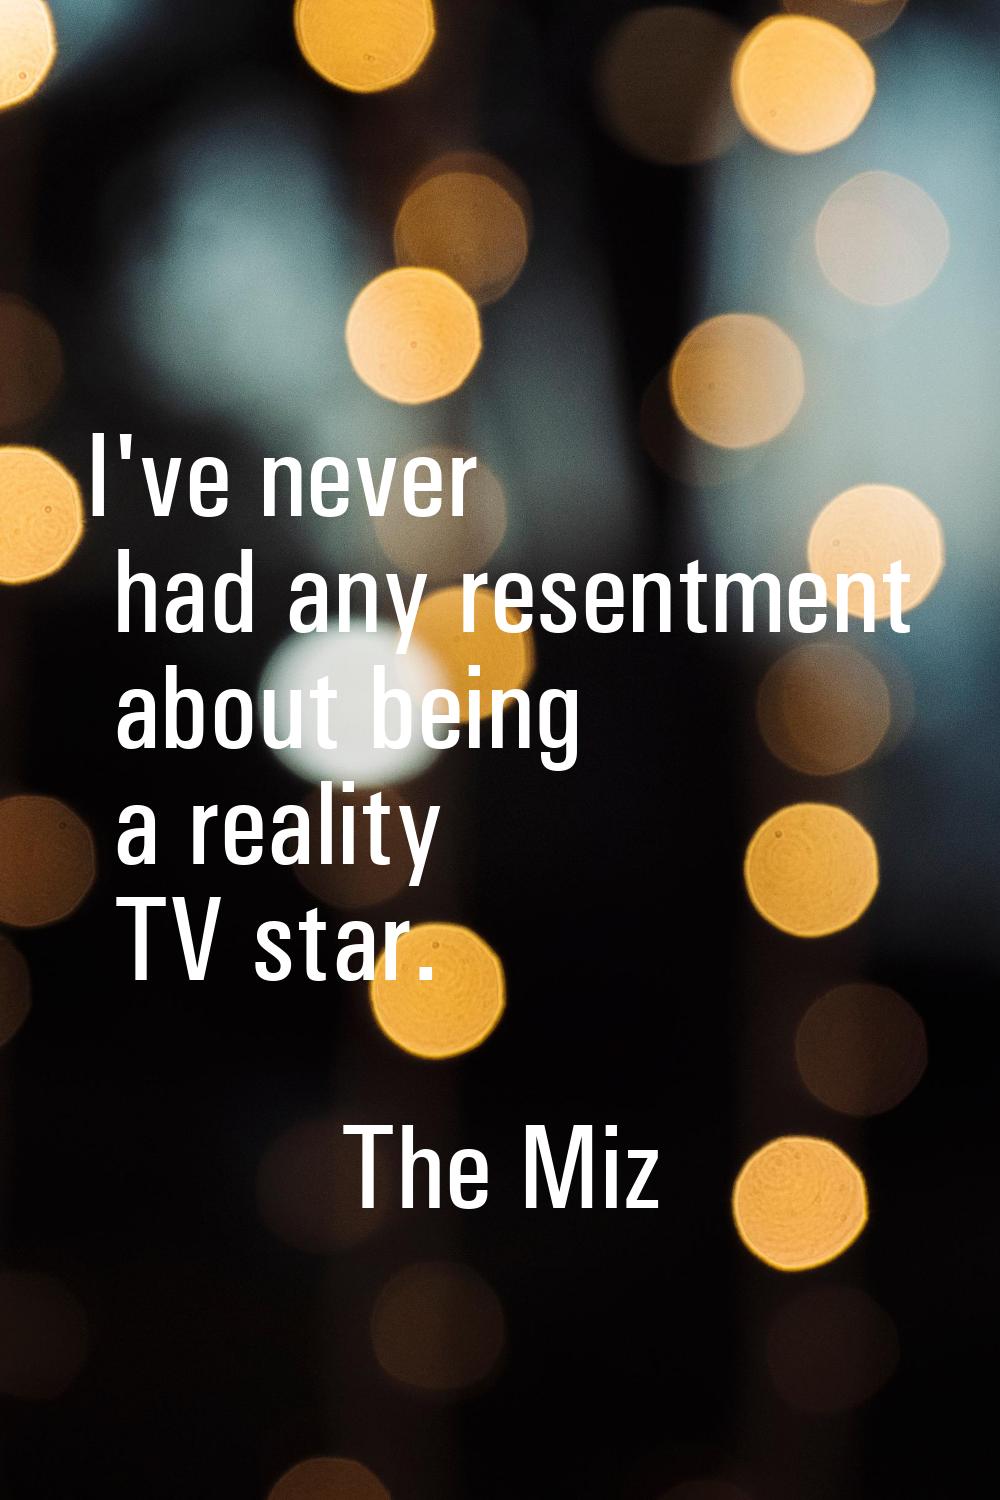 I've never had any resentment about being a reality TV star.